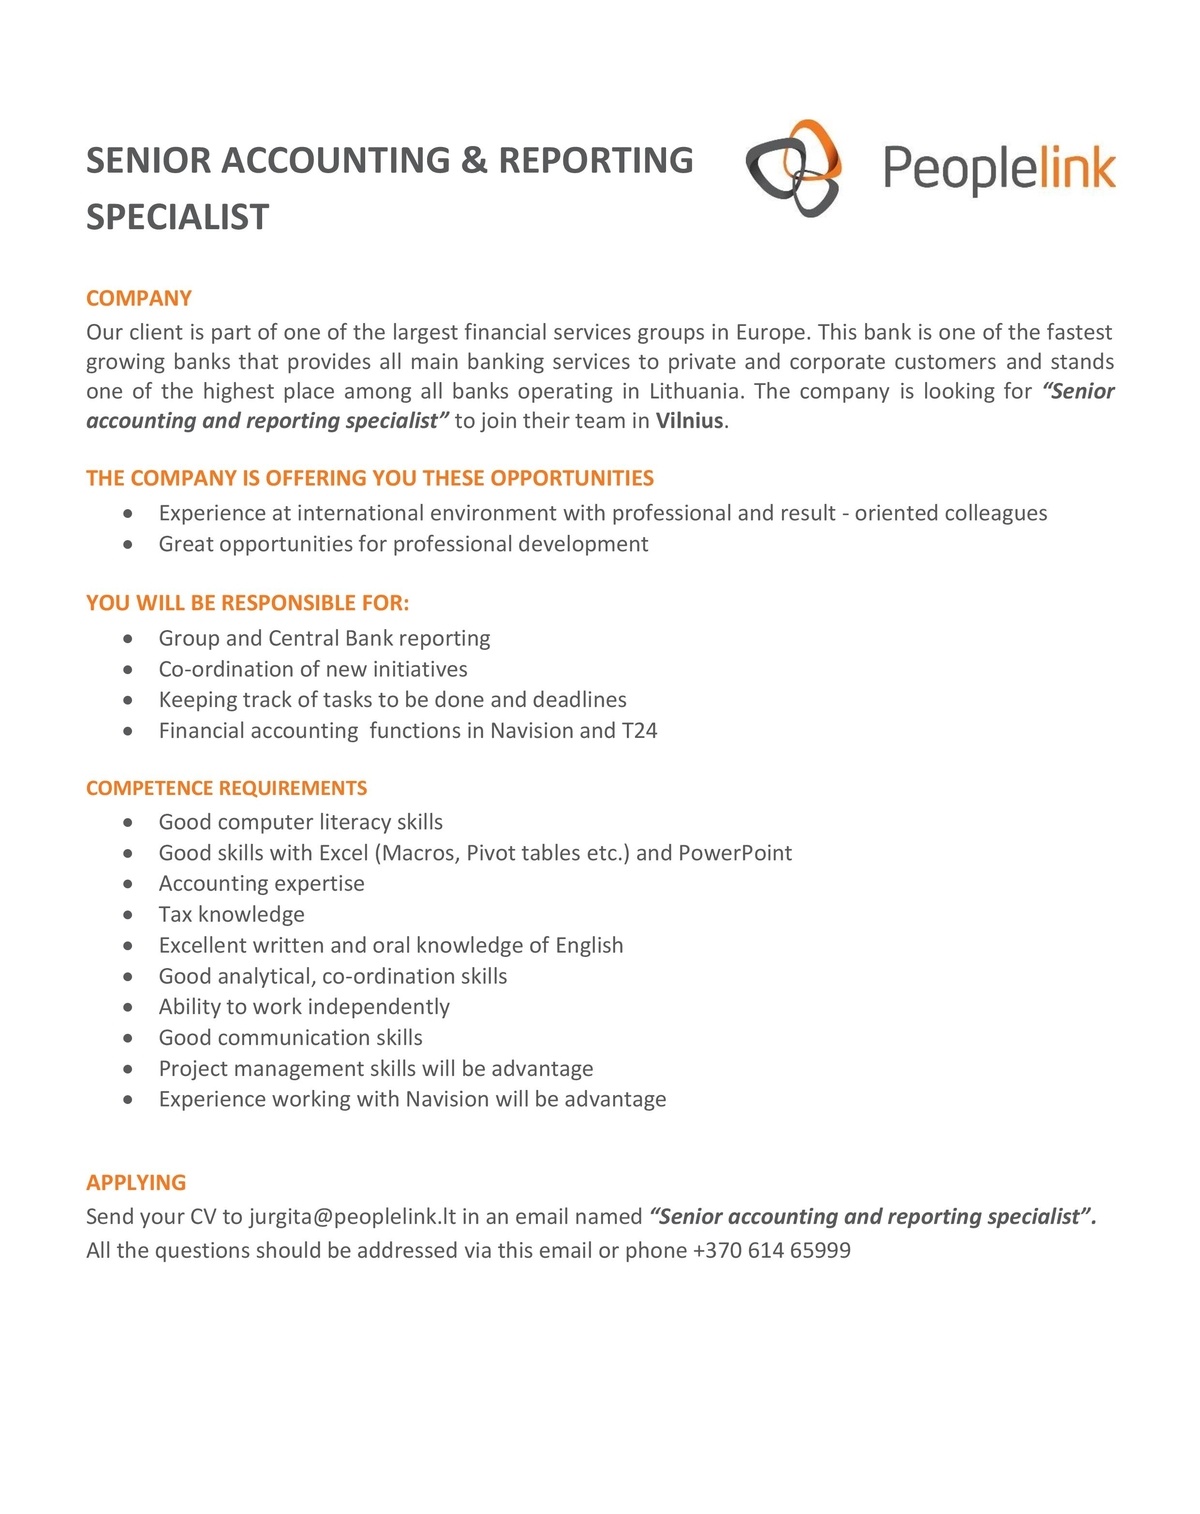 People Link, UAB SENIOR ACCOUNTING & REPORTING SPECIALIST